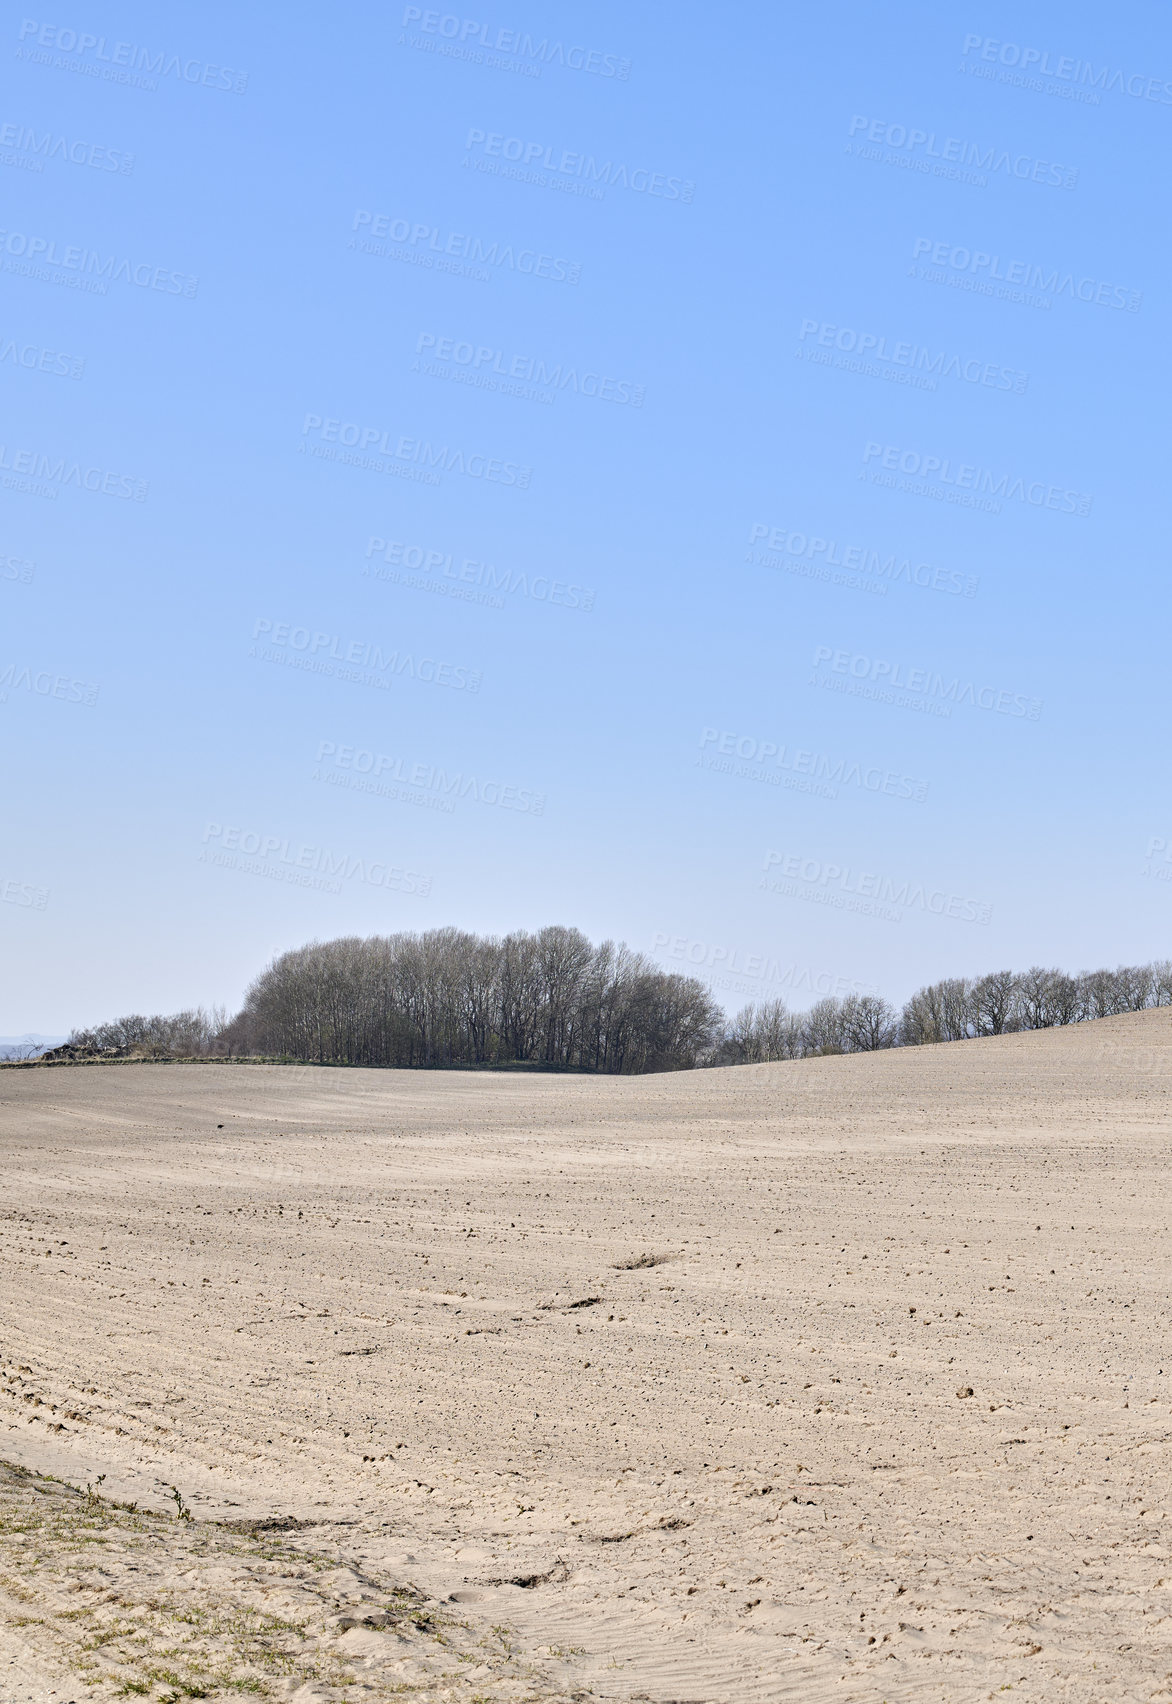 Buy stock photo Barren farm land with trees and blue sky background. A desolate agricultural farmland caused by summer heat droughts and impact on agriculture industry. Open and empty dry sand field with copy space